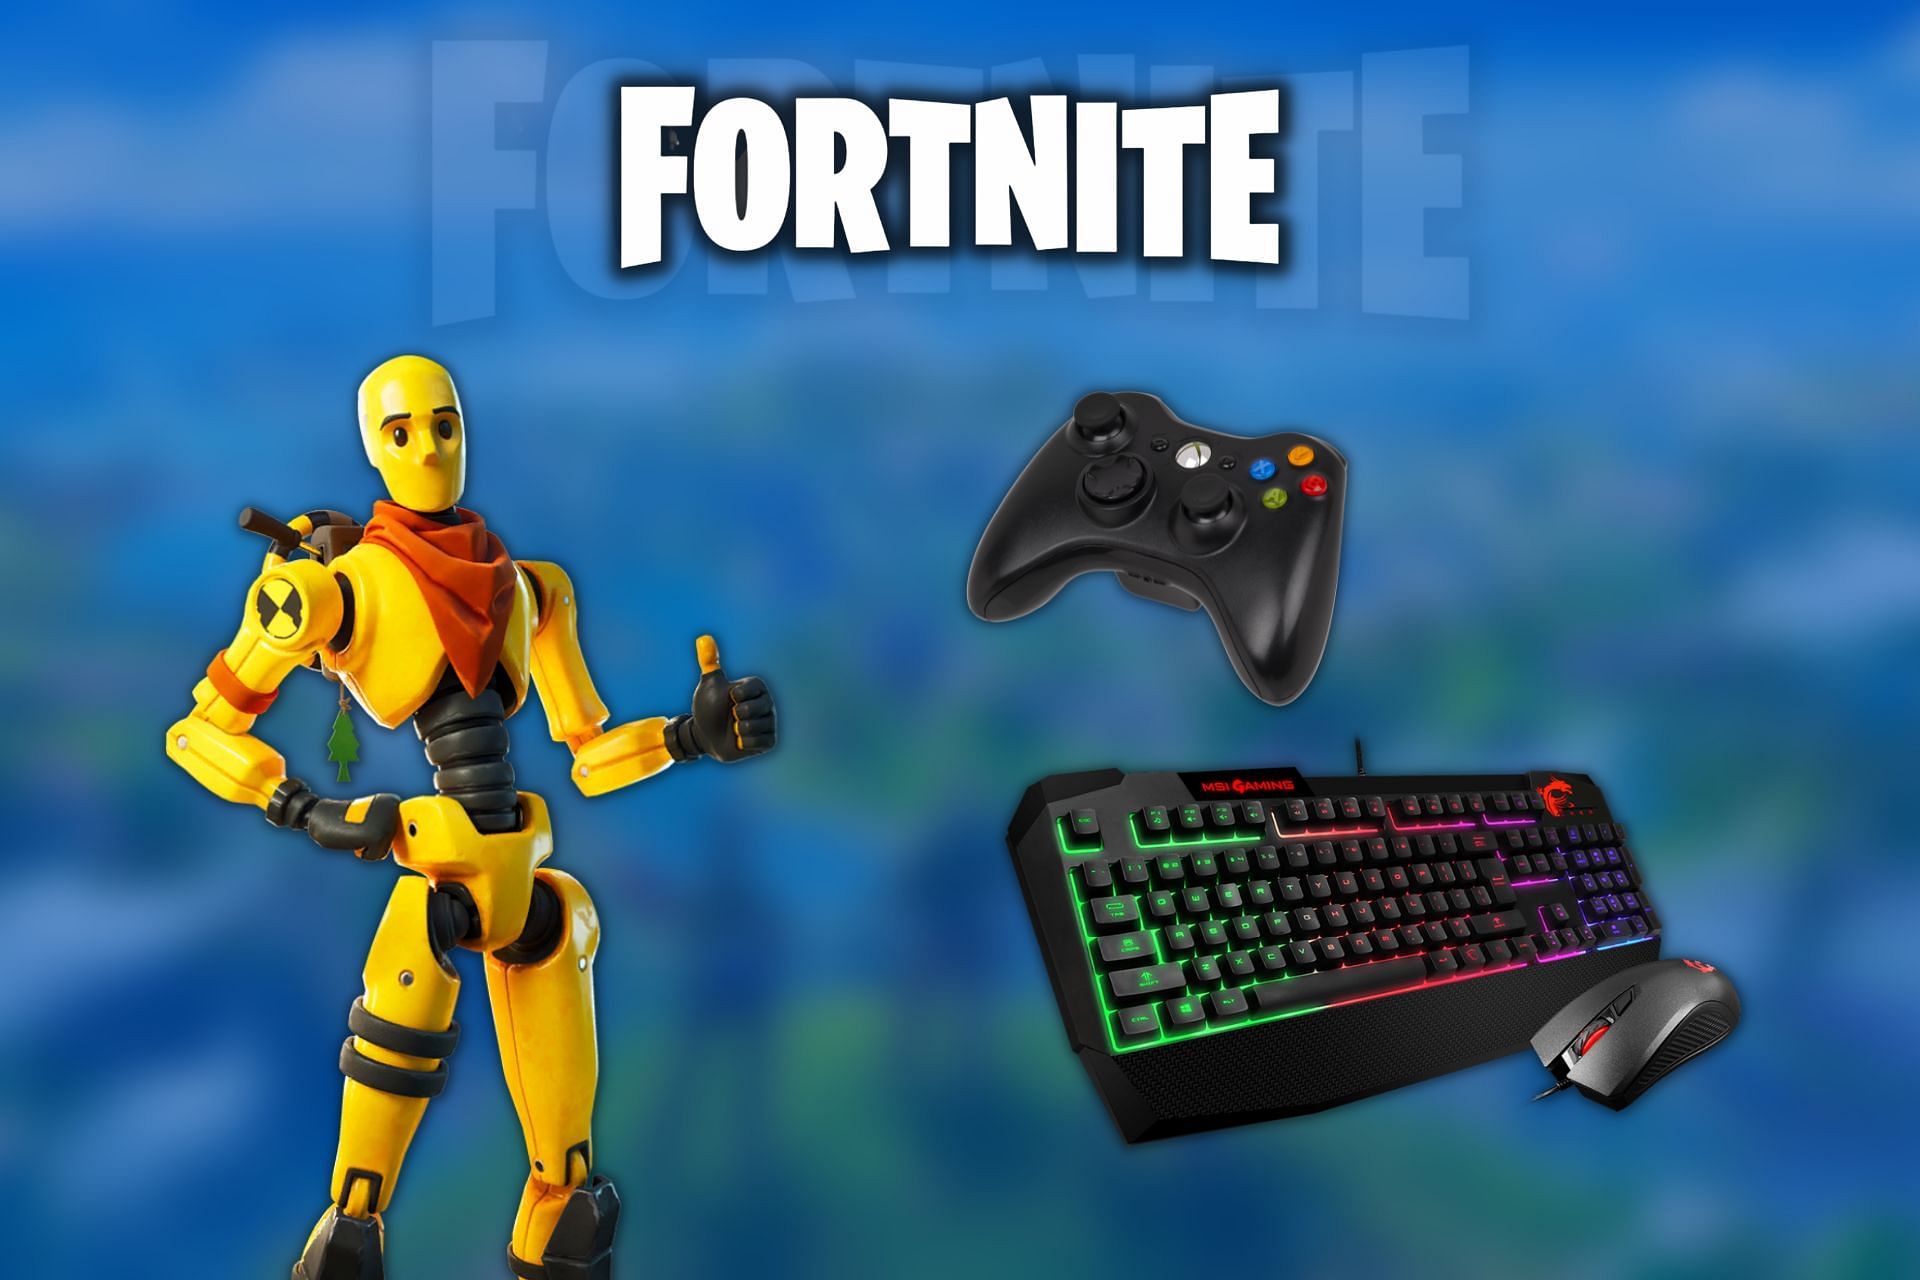 Can you play Fortnite on KBM and Controller at the same time?